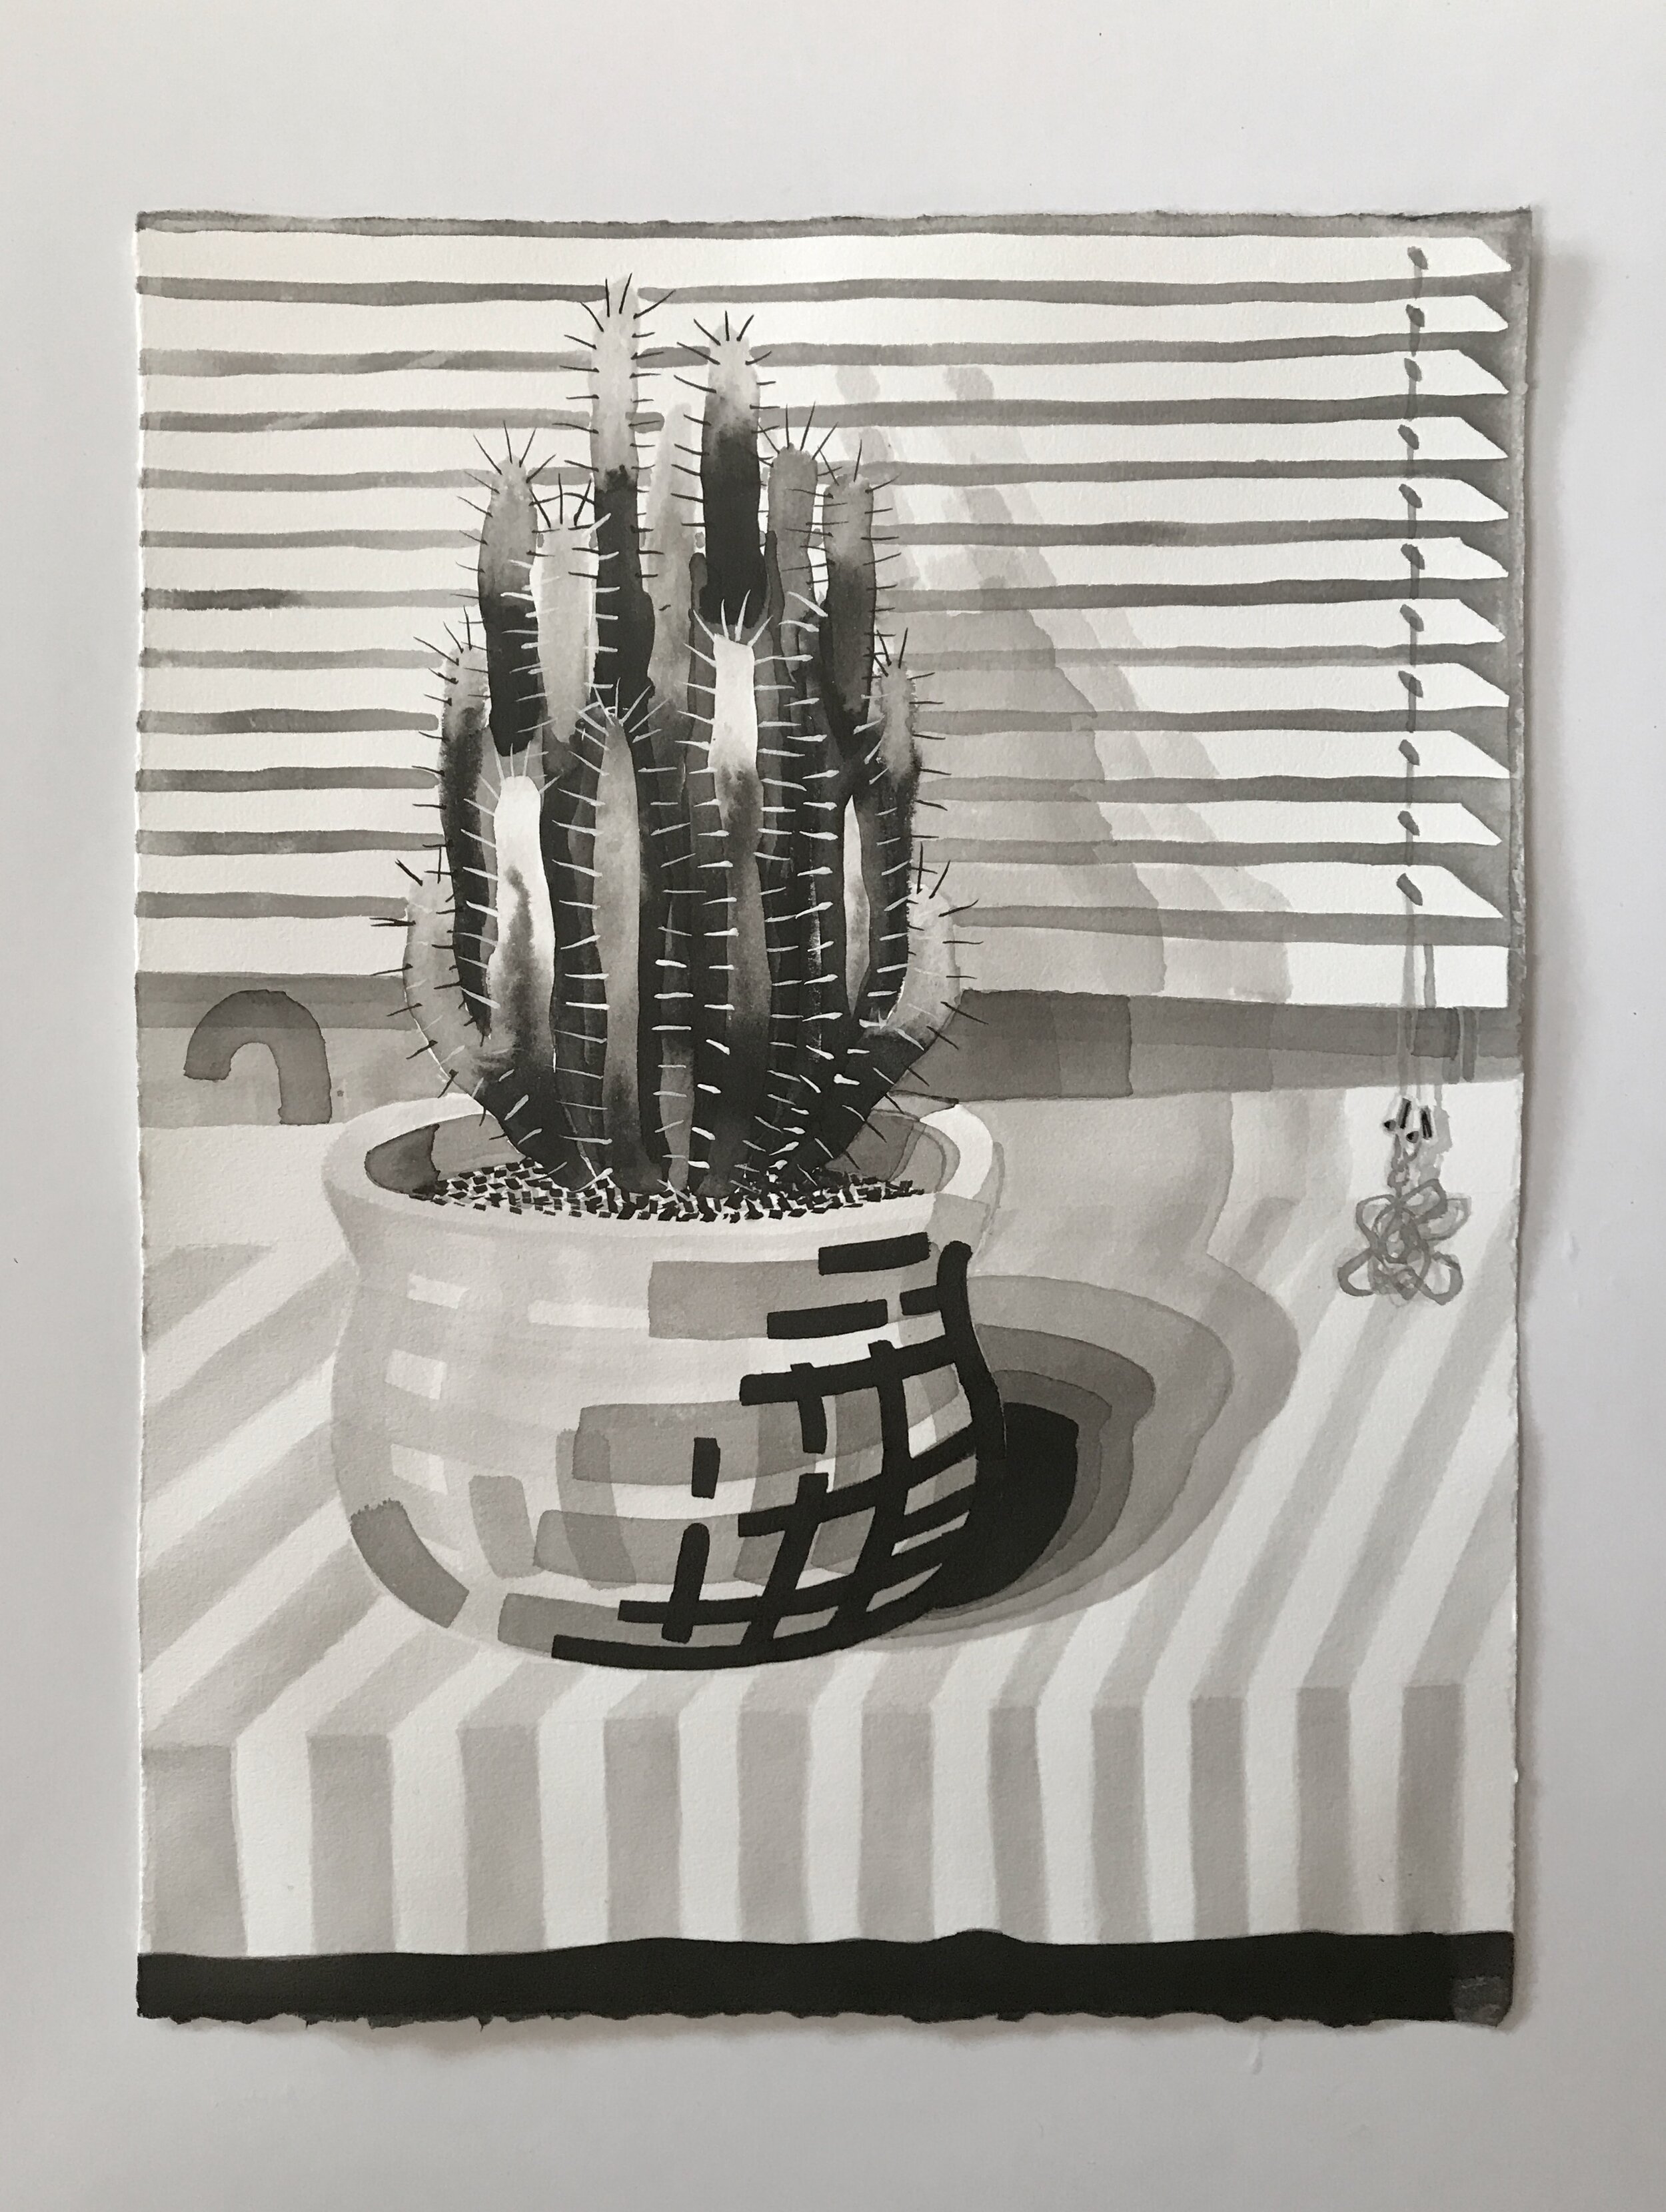 Untitled (memory of a cactus considering its options), 2018, ink and gesso on paper, 17.5 x 13.25 inches